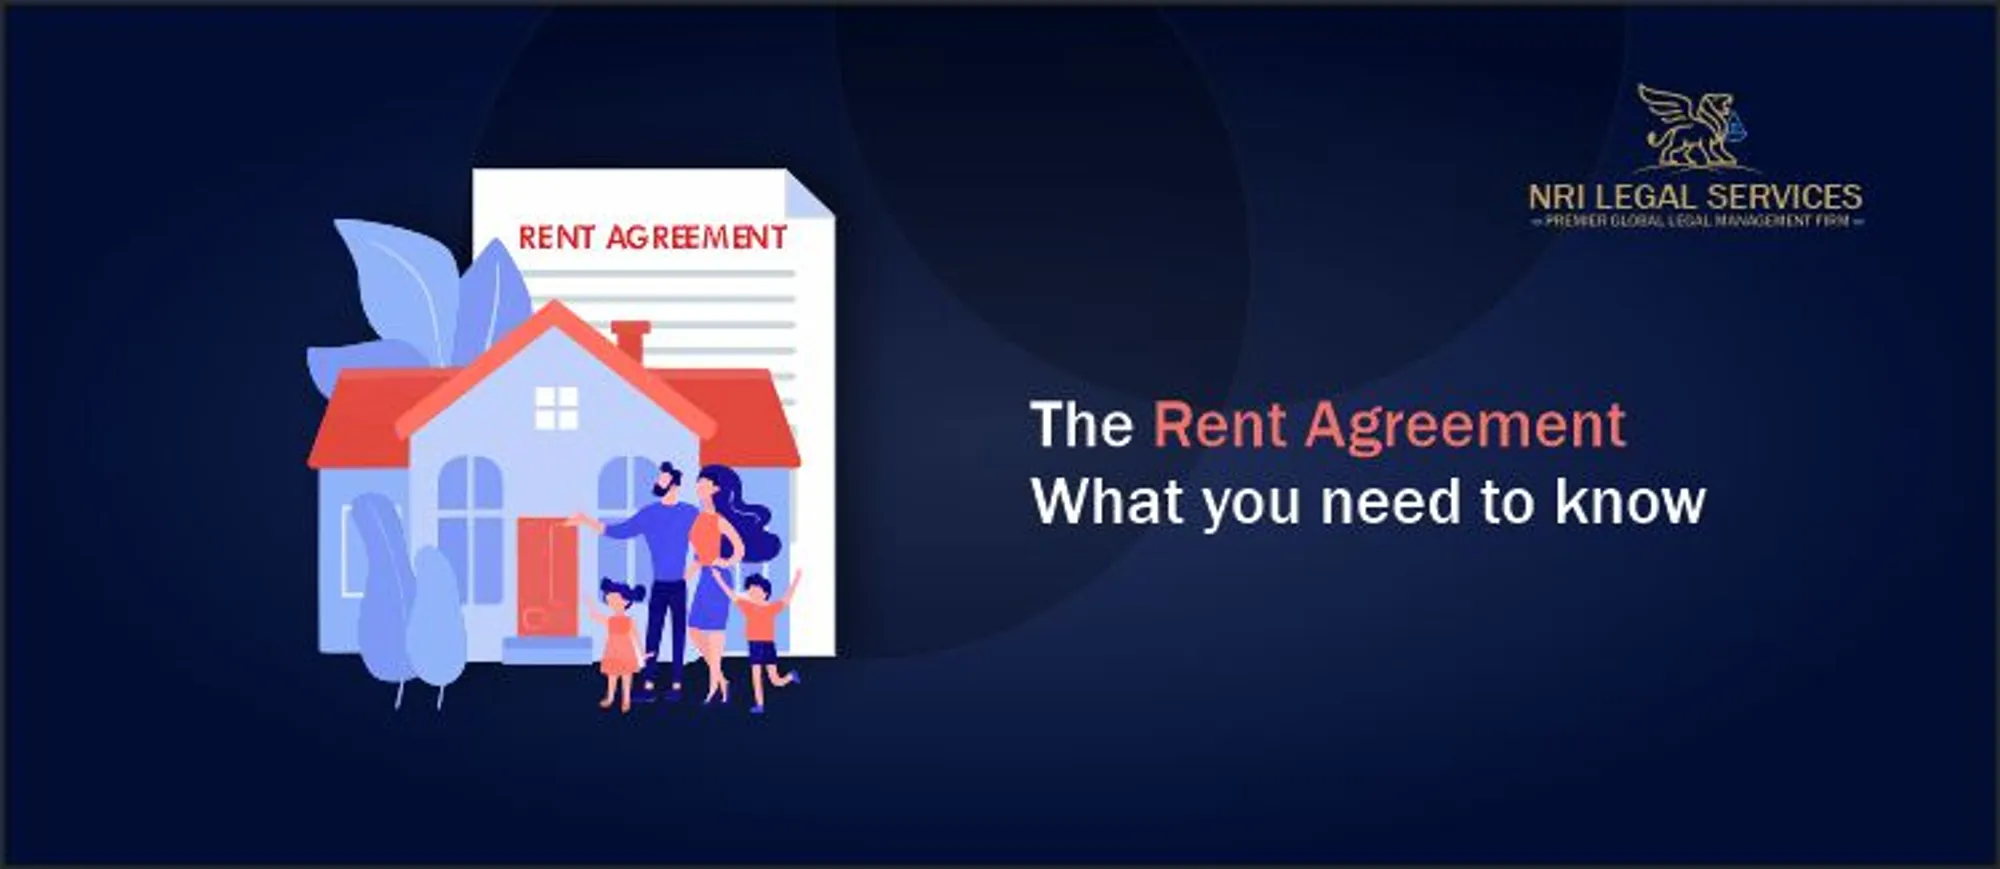 The Rent Agreement in India What you need to know